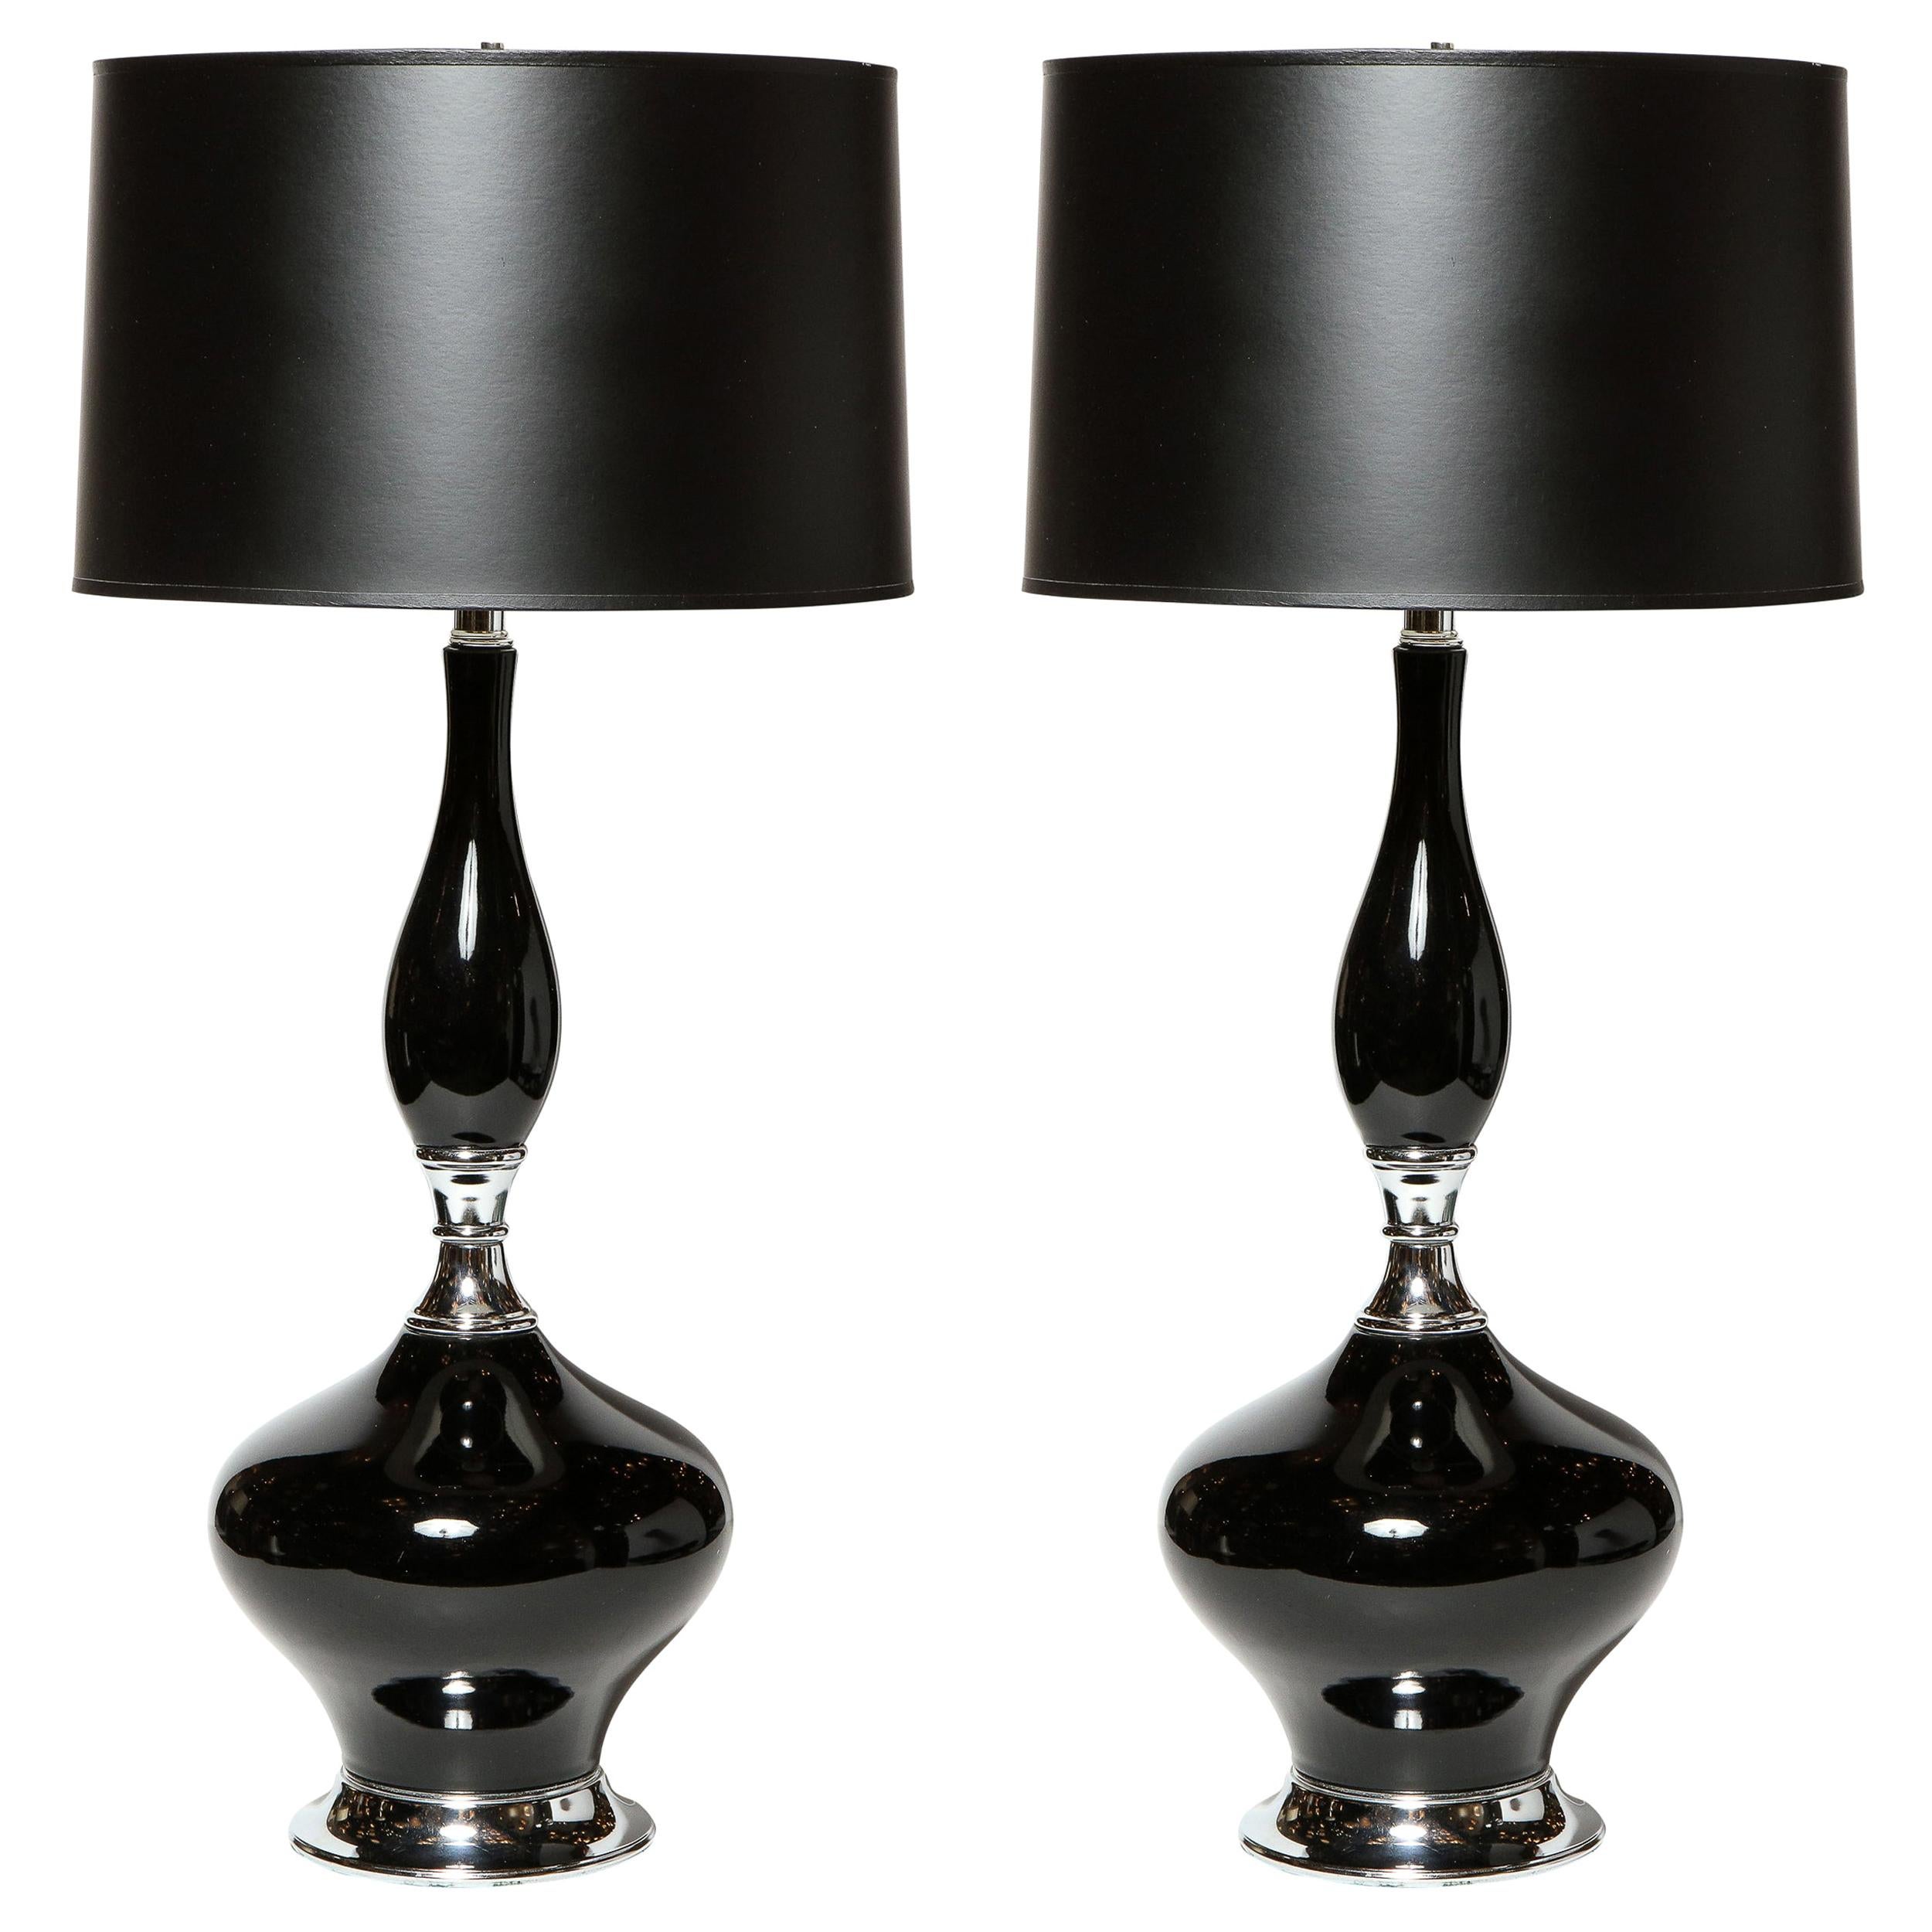 Pair of Mid-Century Modern Sculptural Black Glazed Ceramic Lamps w/ Chrome Bases For Sale